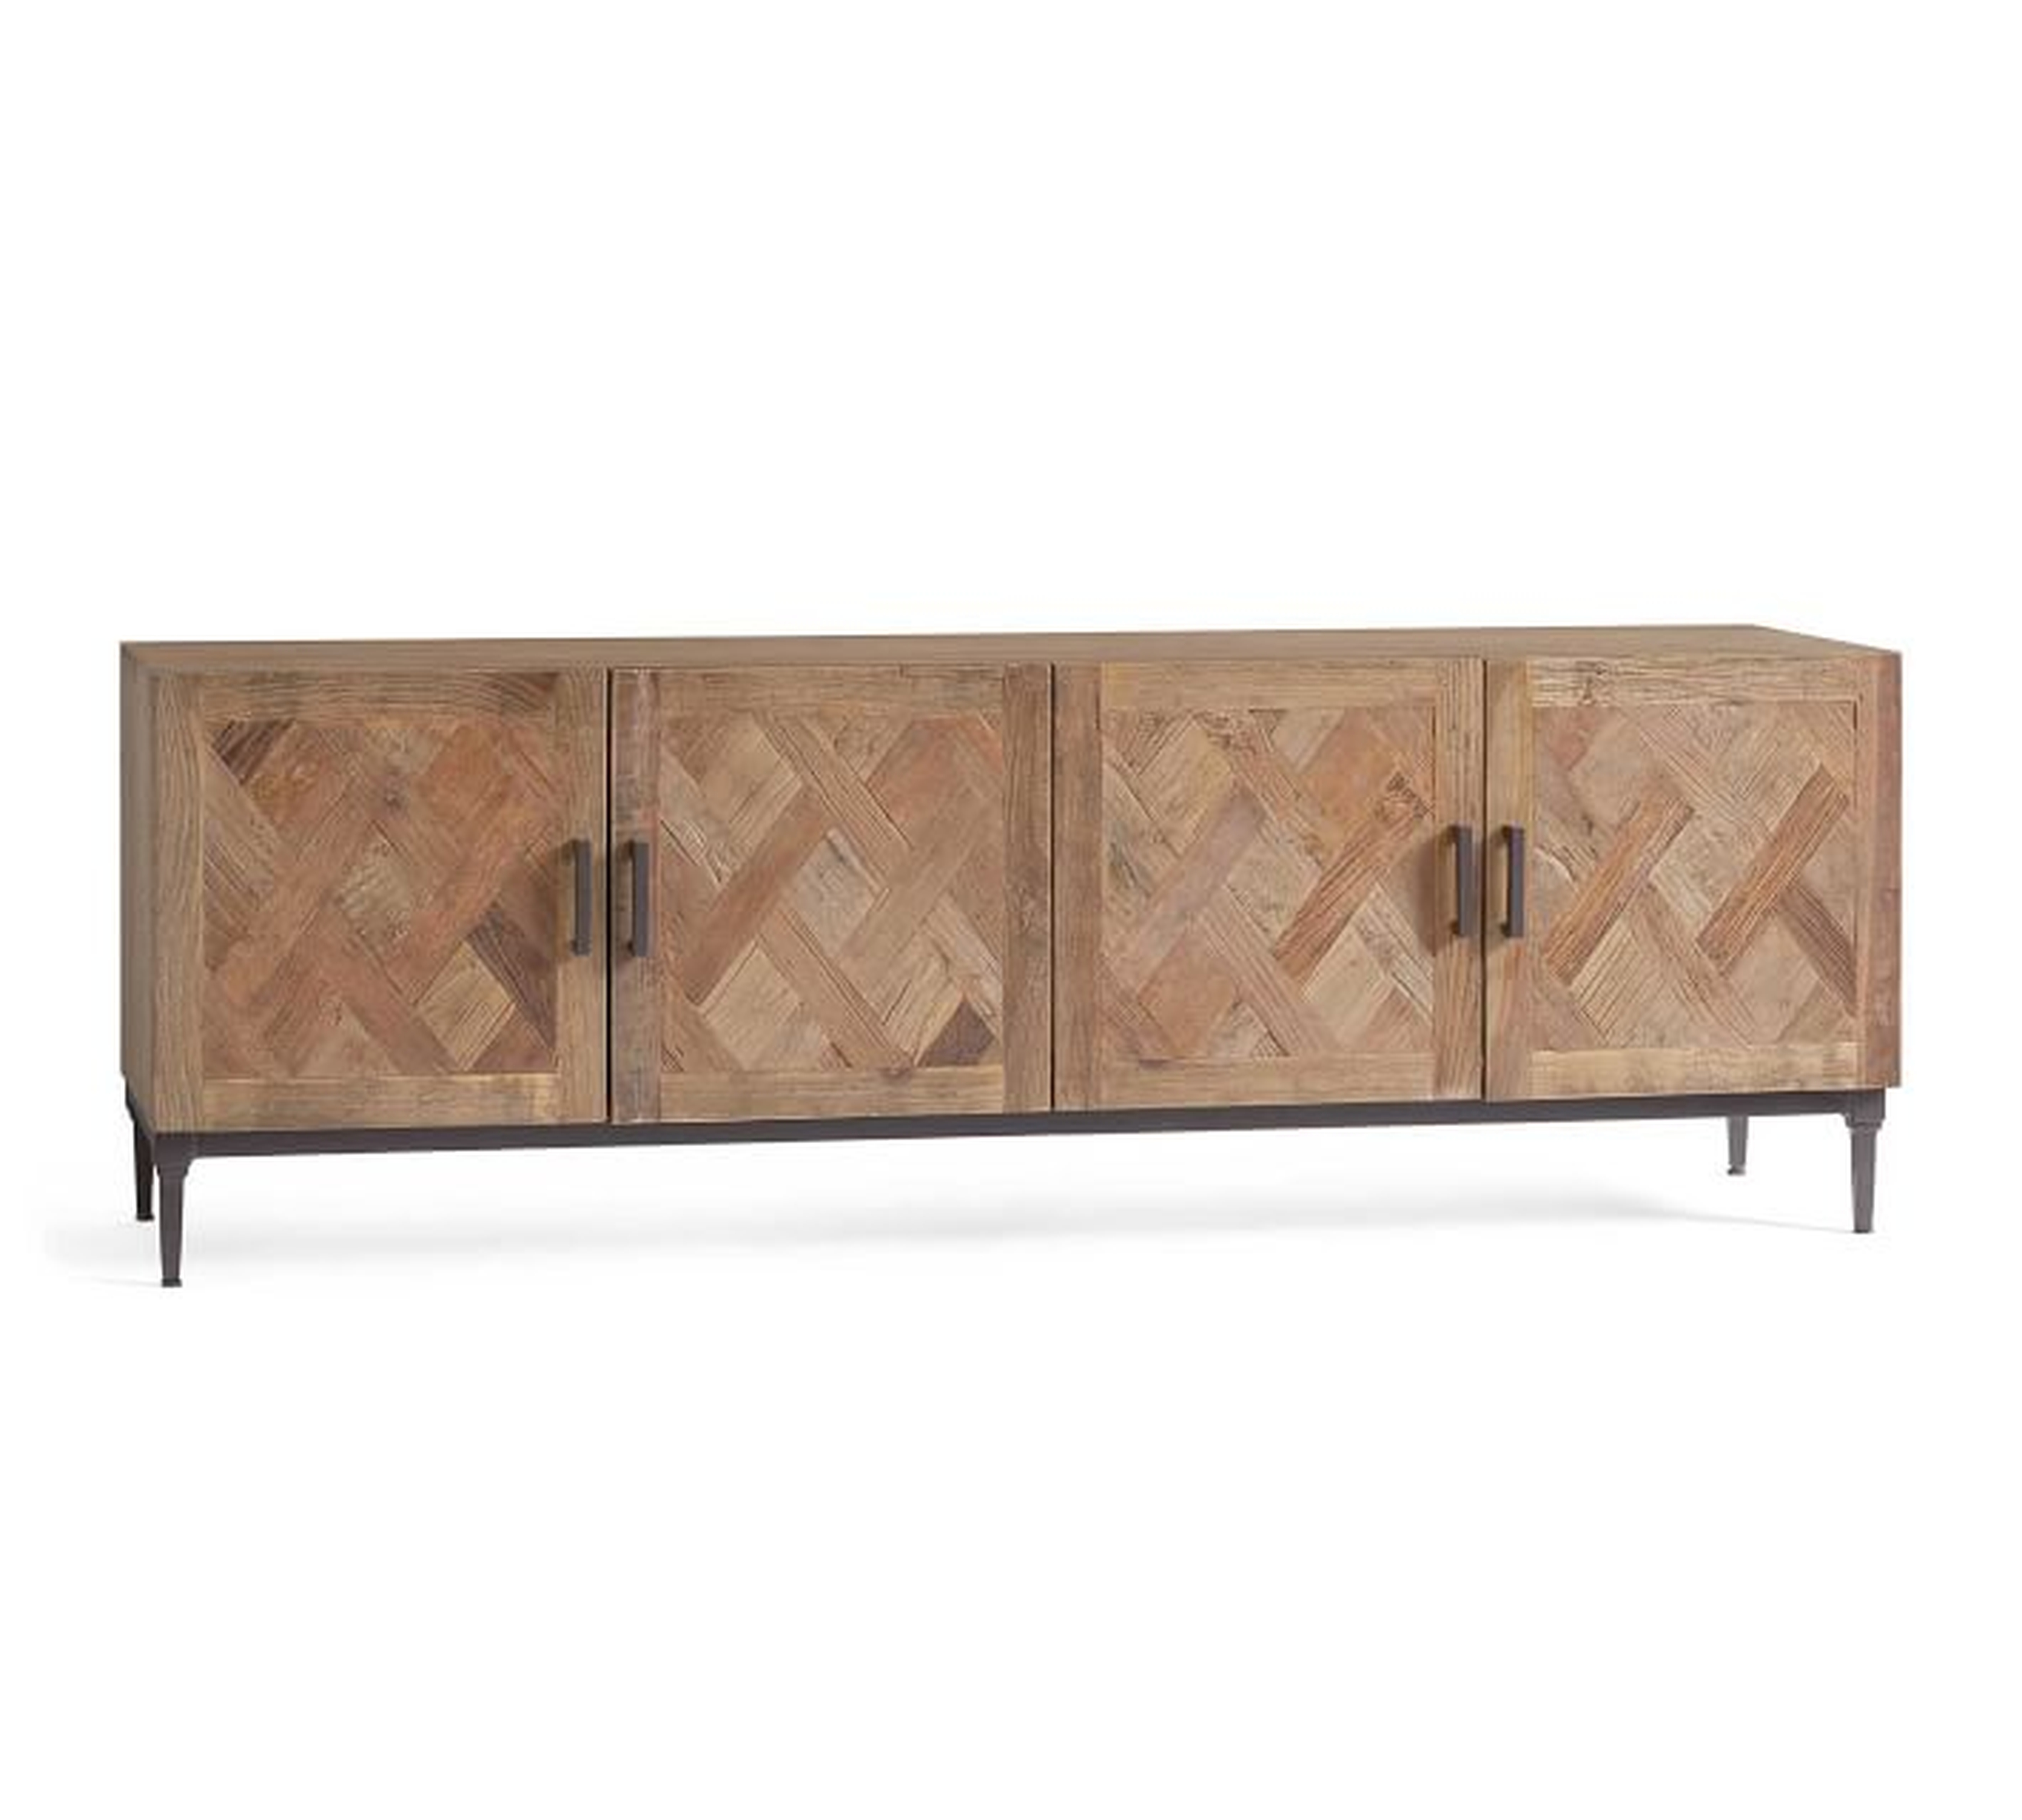 Parquet Reclaimed Wood Media Console with Doors - Pottery Barn